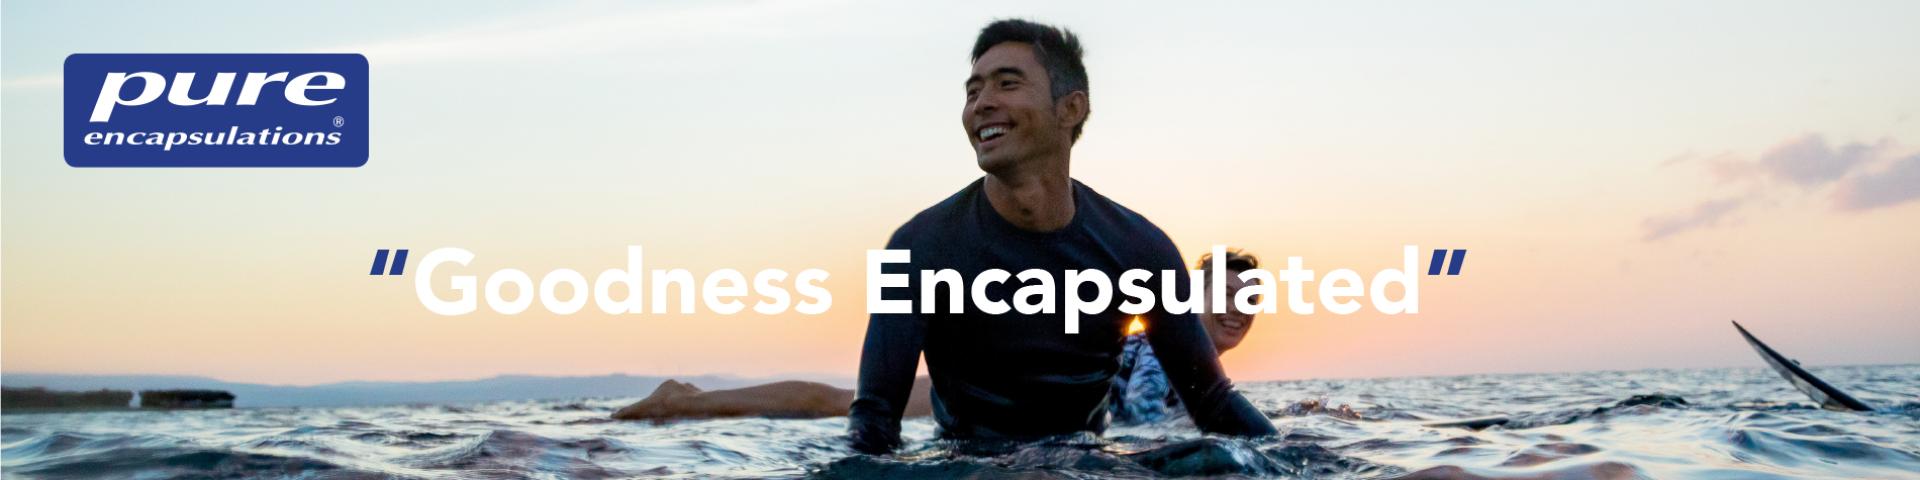 Man smiling and surfing. "Goodness Encapsulated" written and Pure Encapsulations.